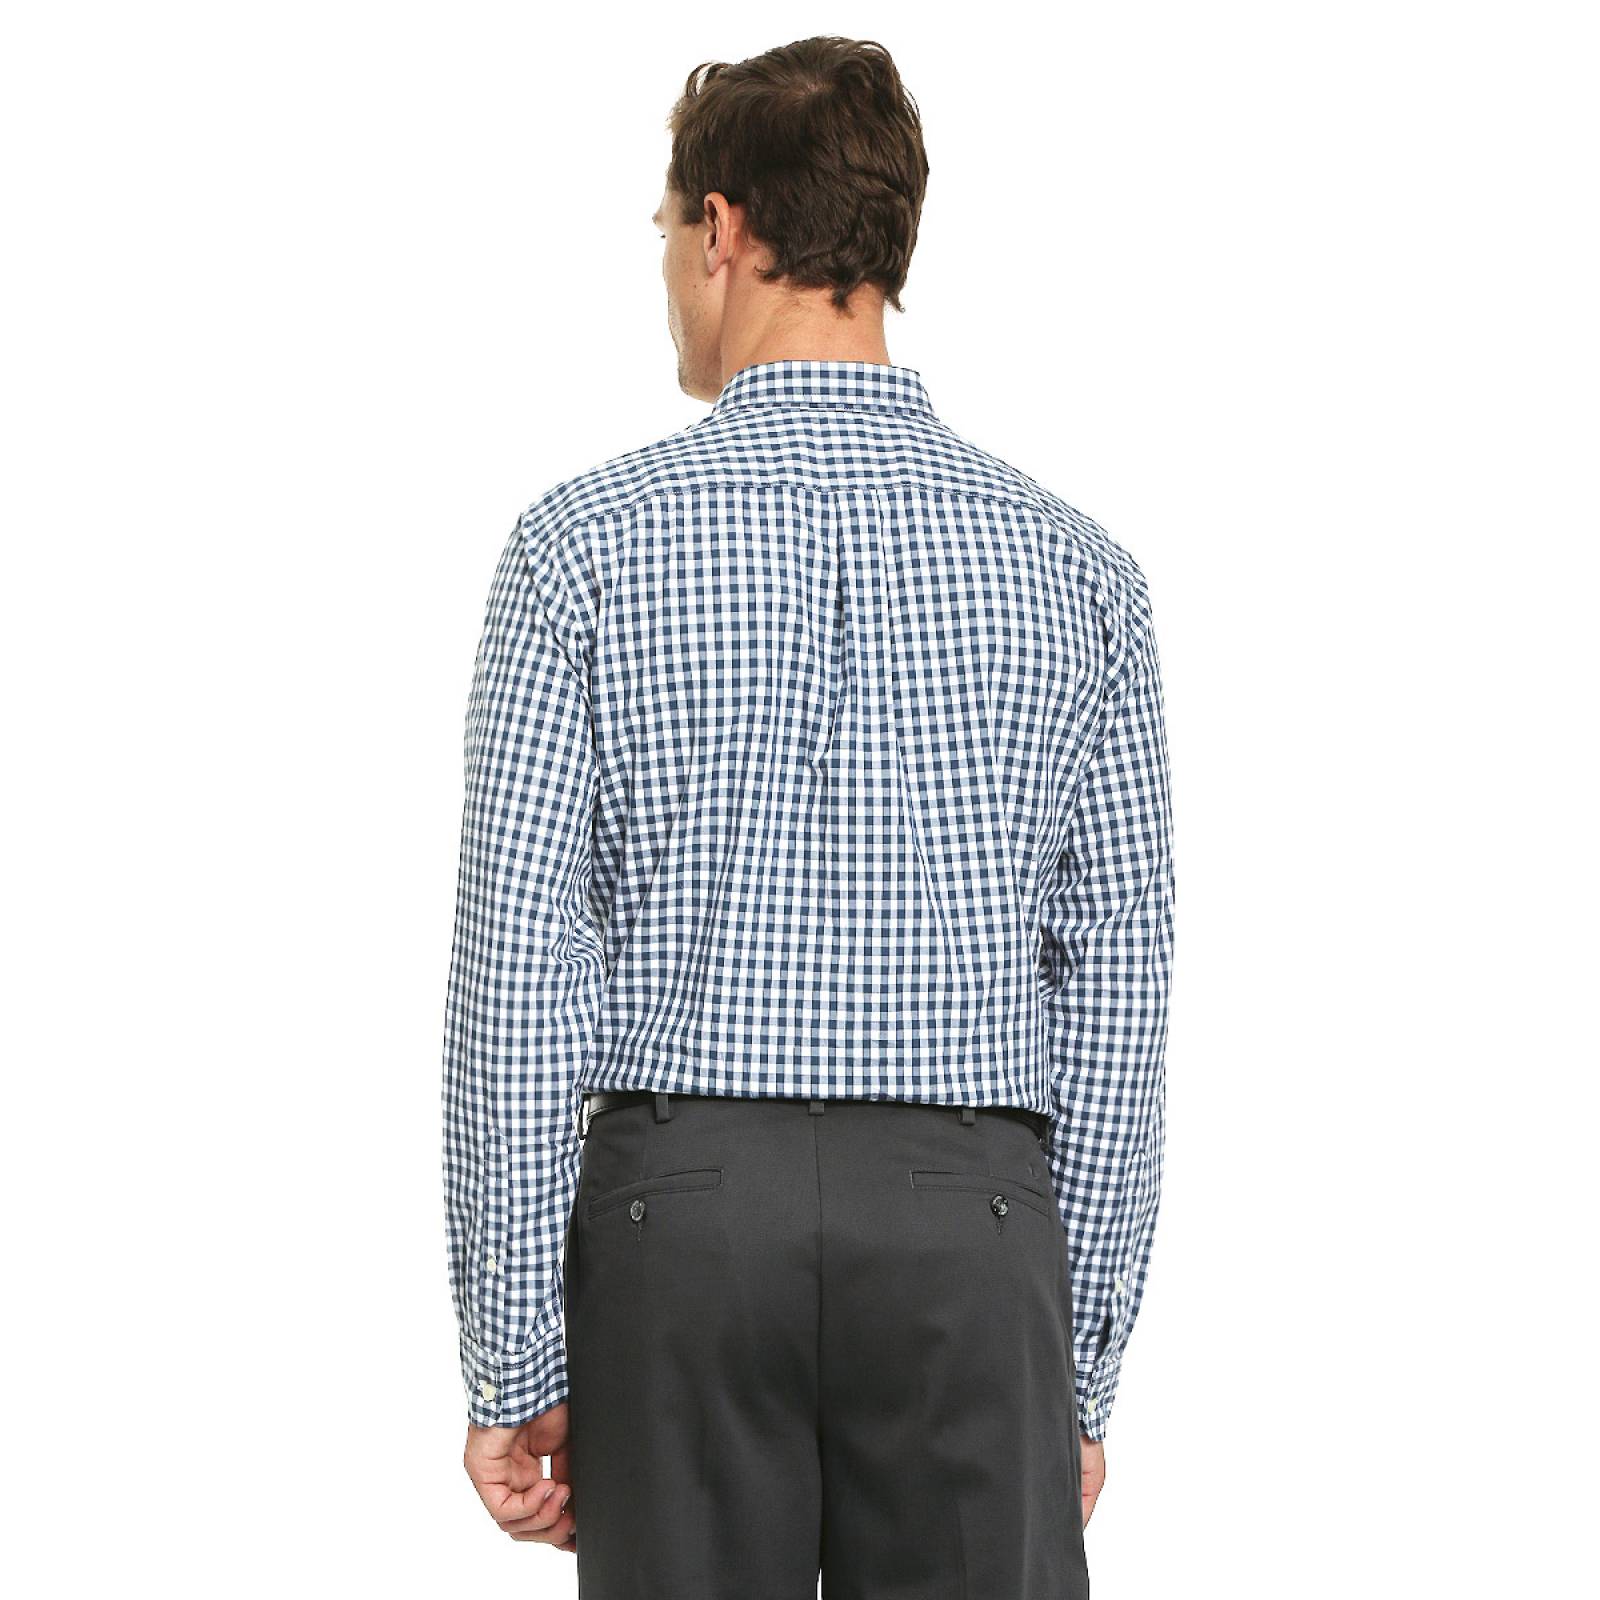 Camisa Laundered Fitted Lg Gingham Moonlit para Caballero